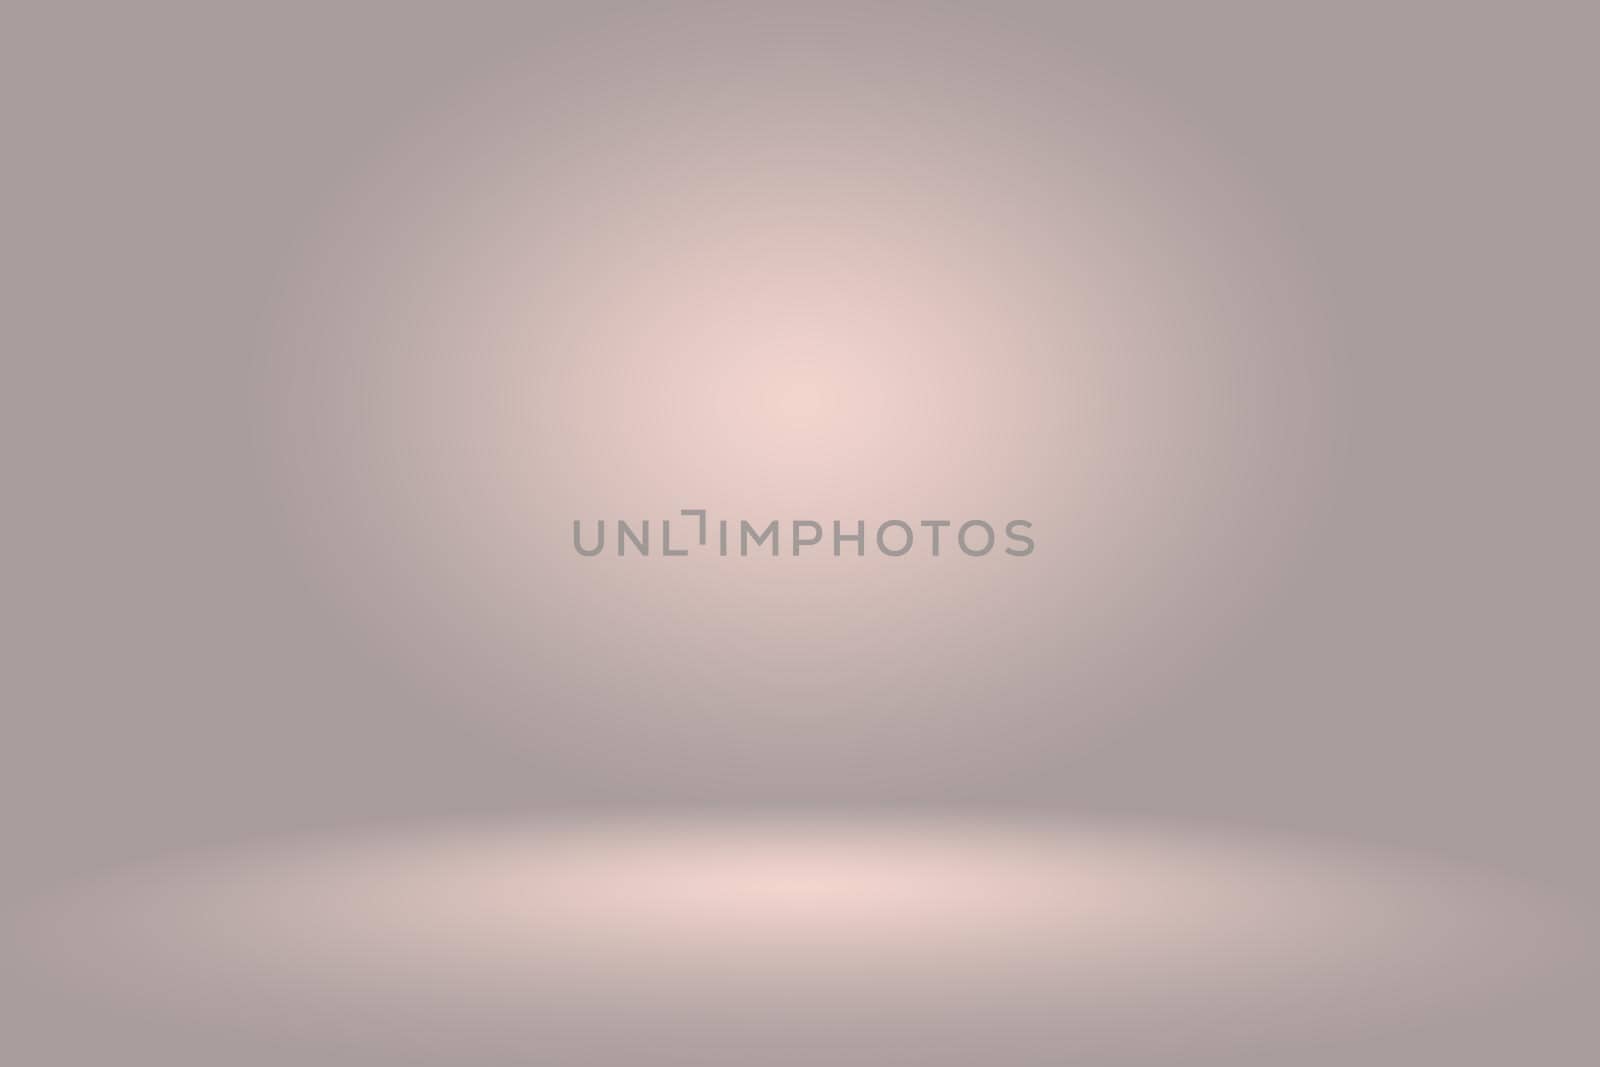 Abstract Empty Dark White Grey gradient with Black solid vignette lighting Studio wall and floor background well use as backdrop. Background empty white room with space for your text and picture.